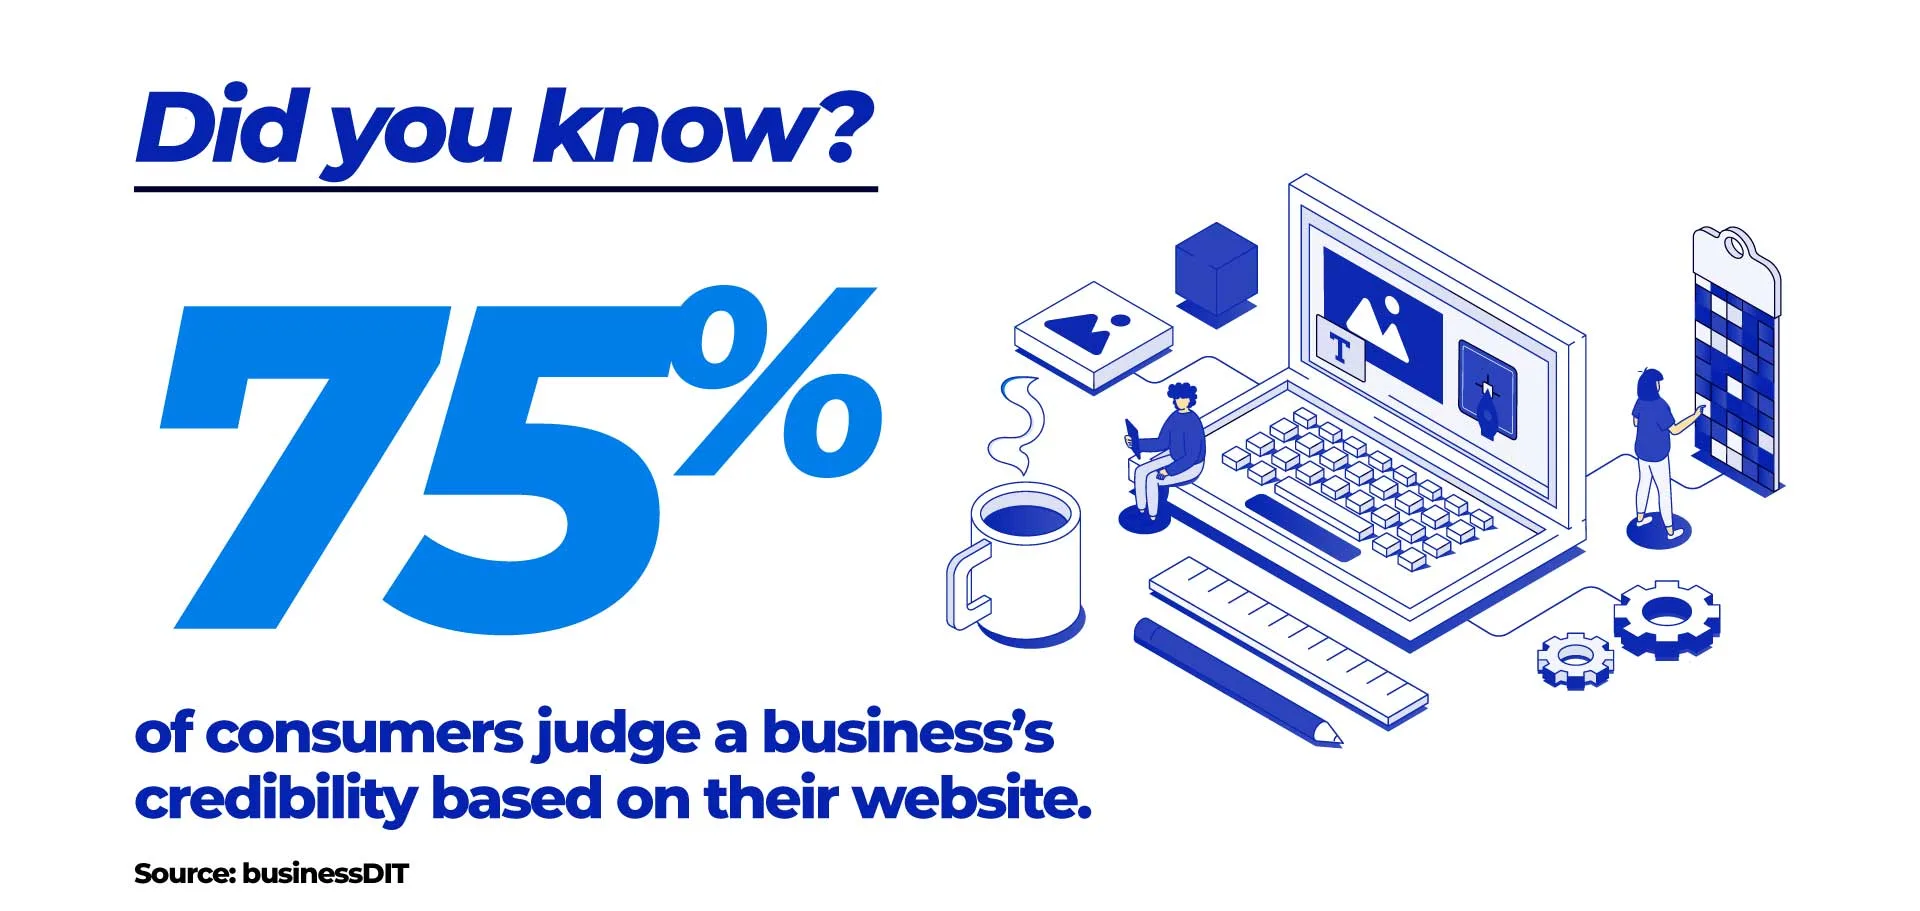 Statistic Graphic: Did you know? 75% of consumers judge a business's credibility based on their website.